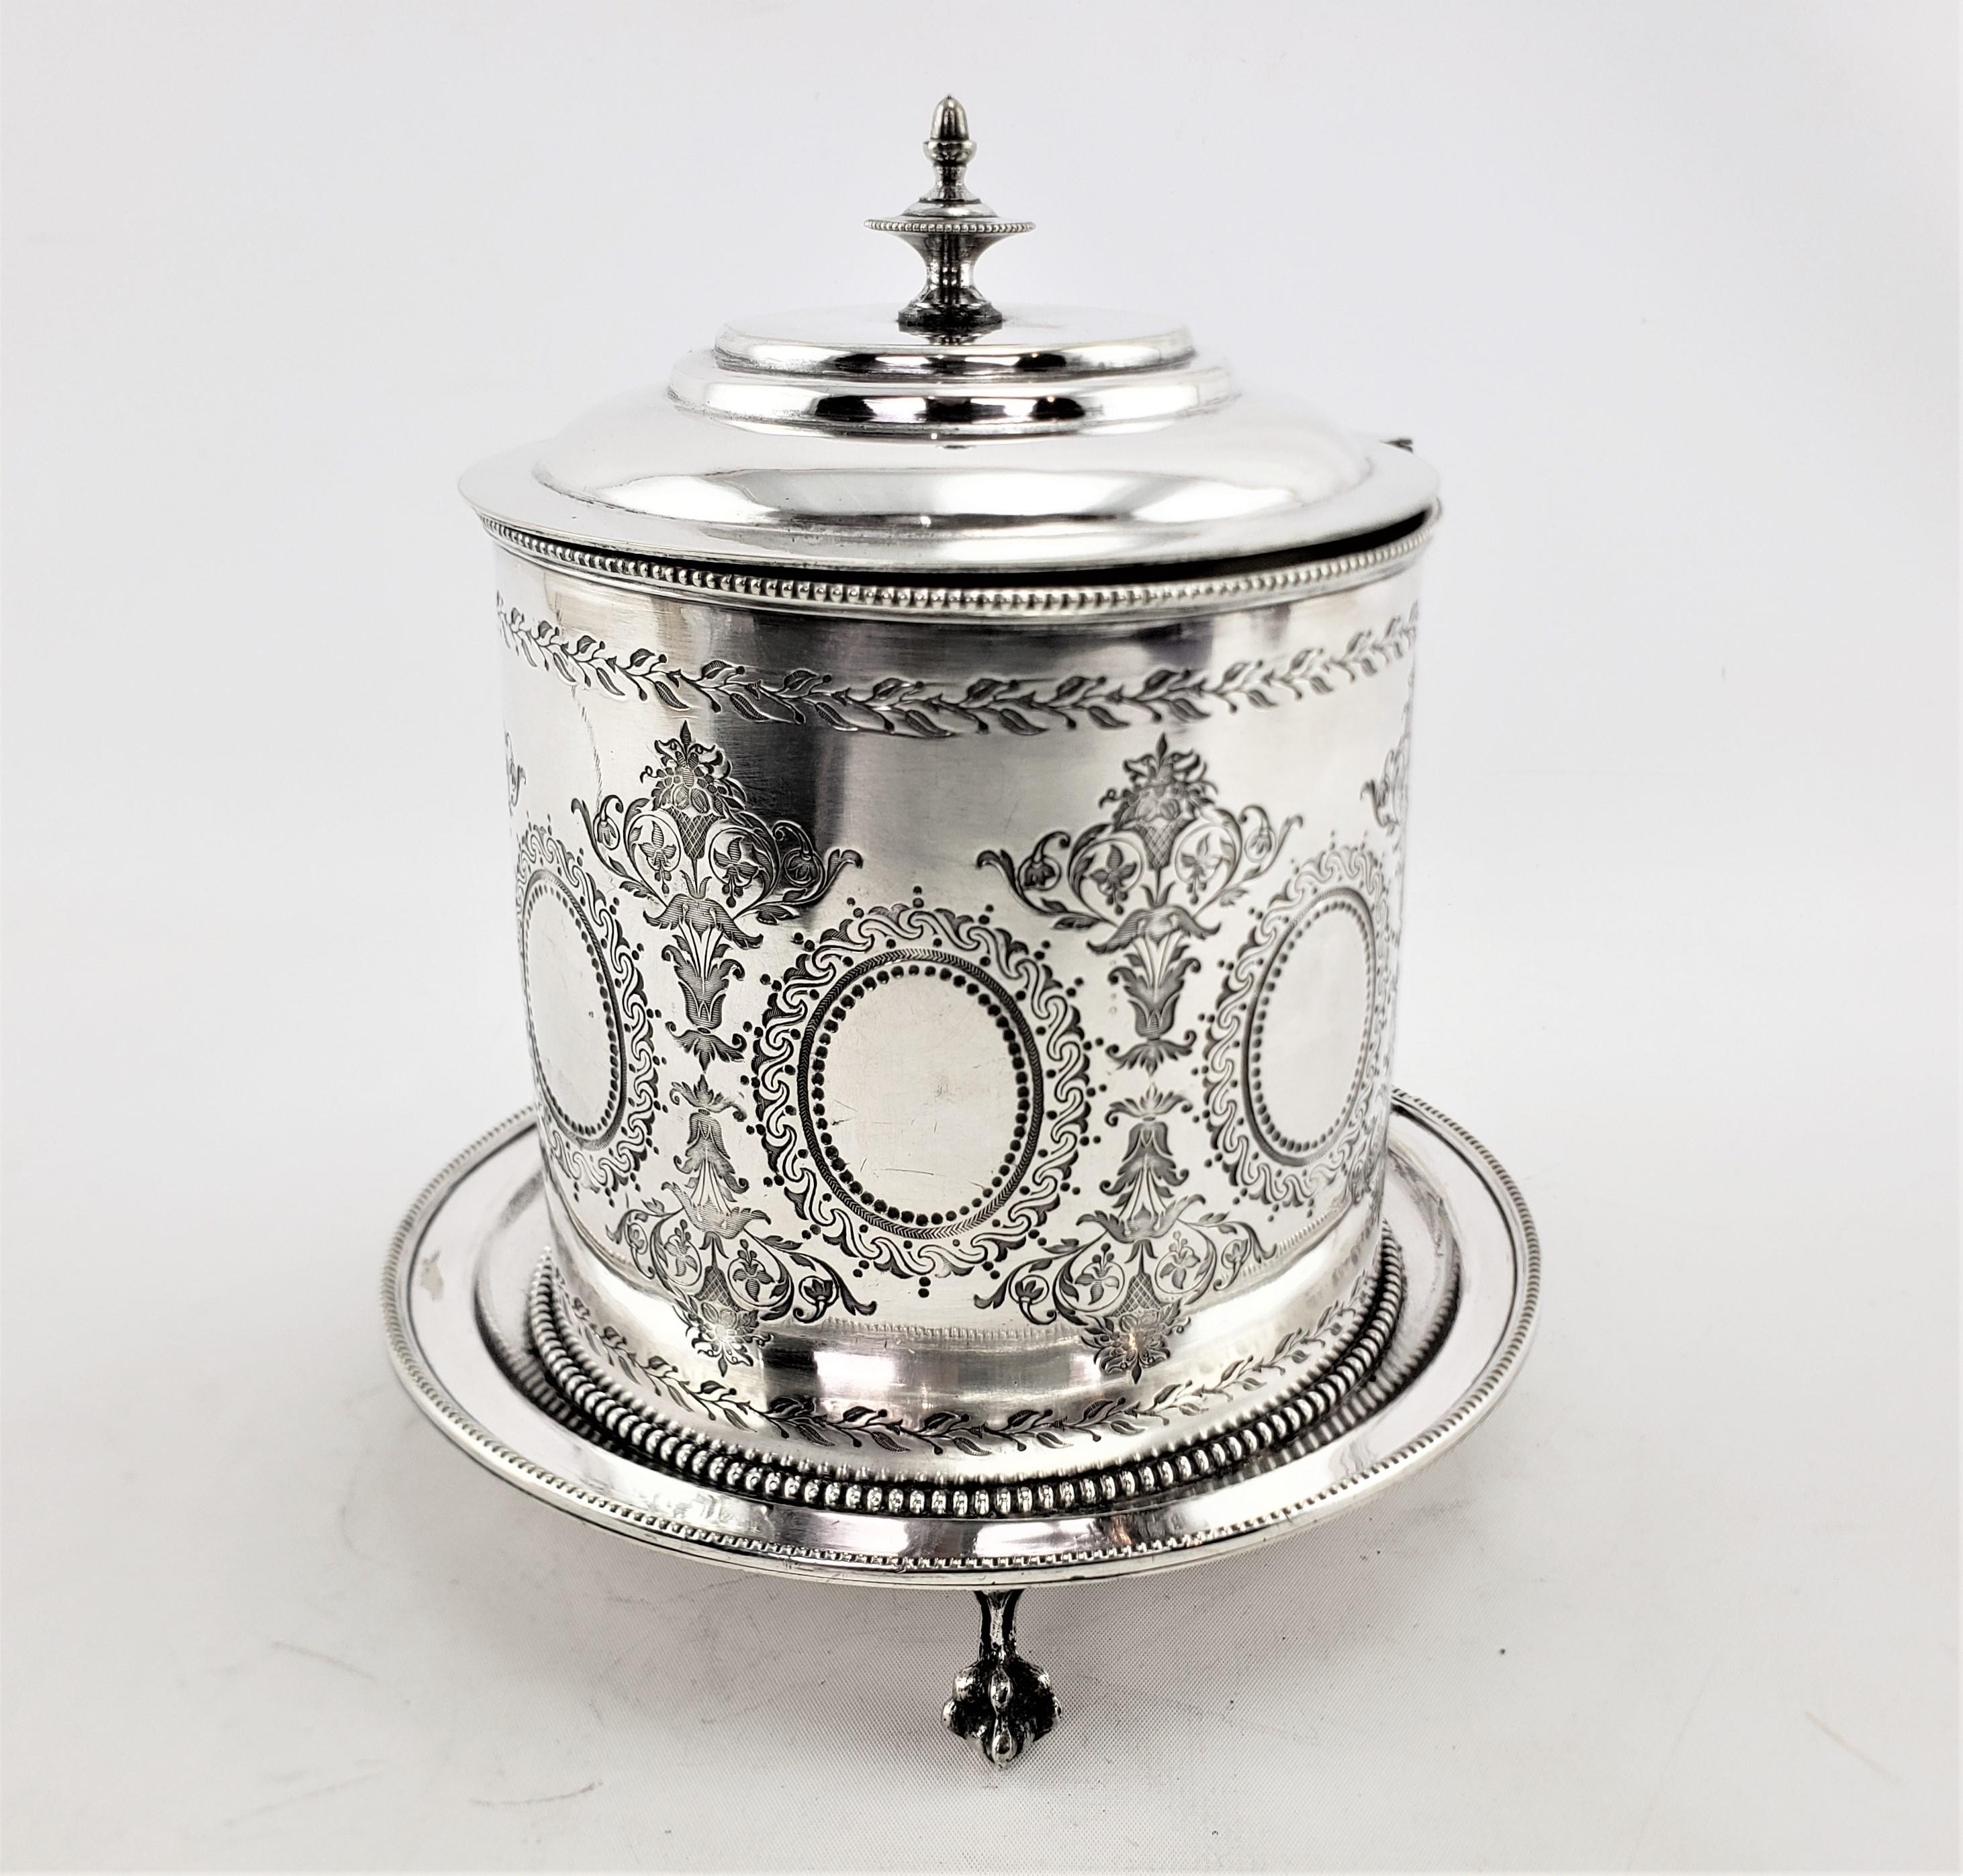 Antique English Silver Plated Oval Biscuit Barrel with Elaborate Engraving In Good Condition For Sale In Hamilton, Ontario